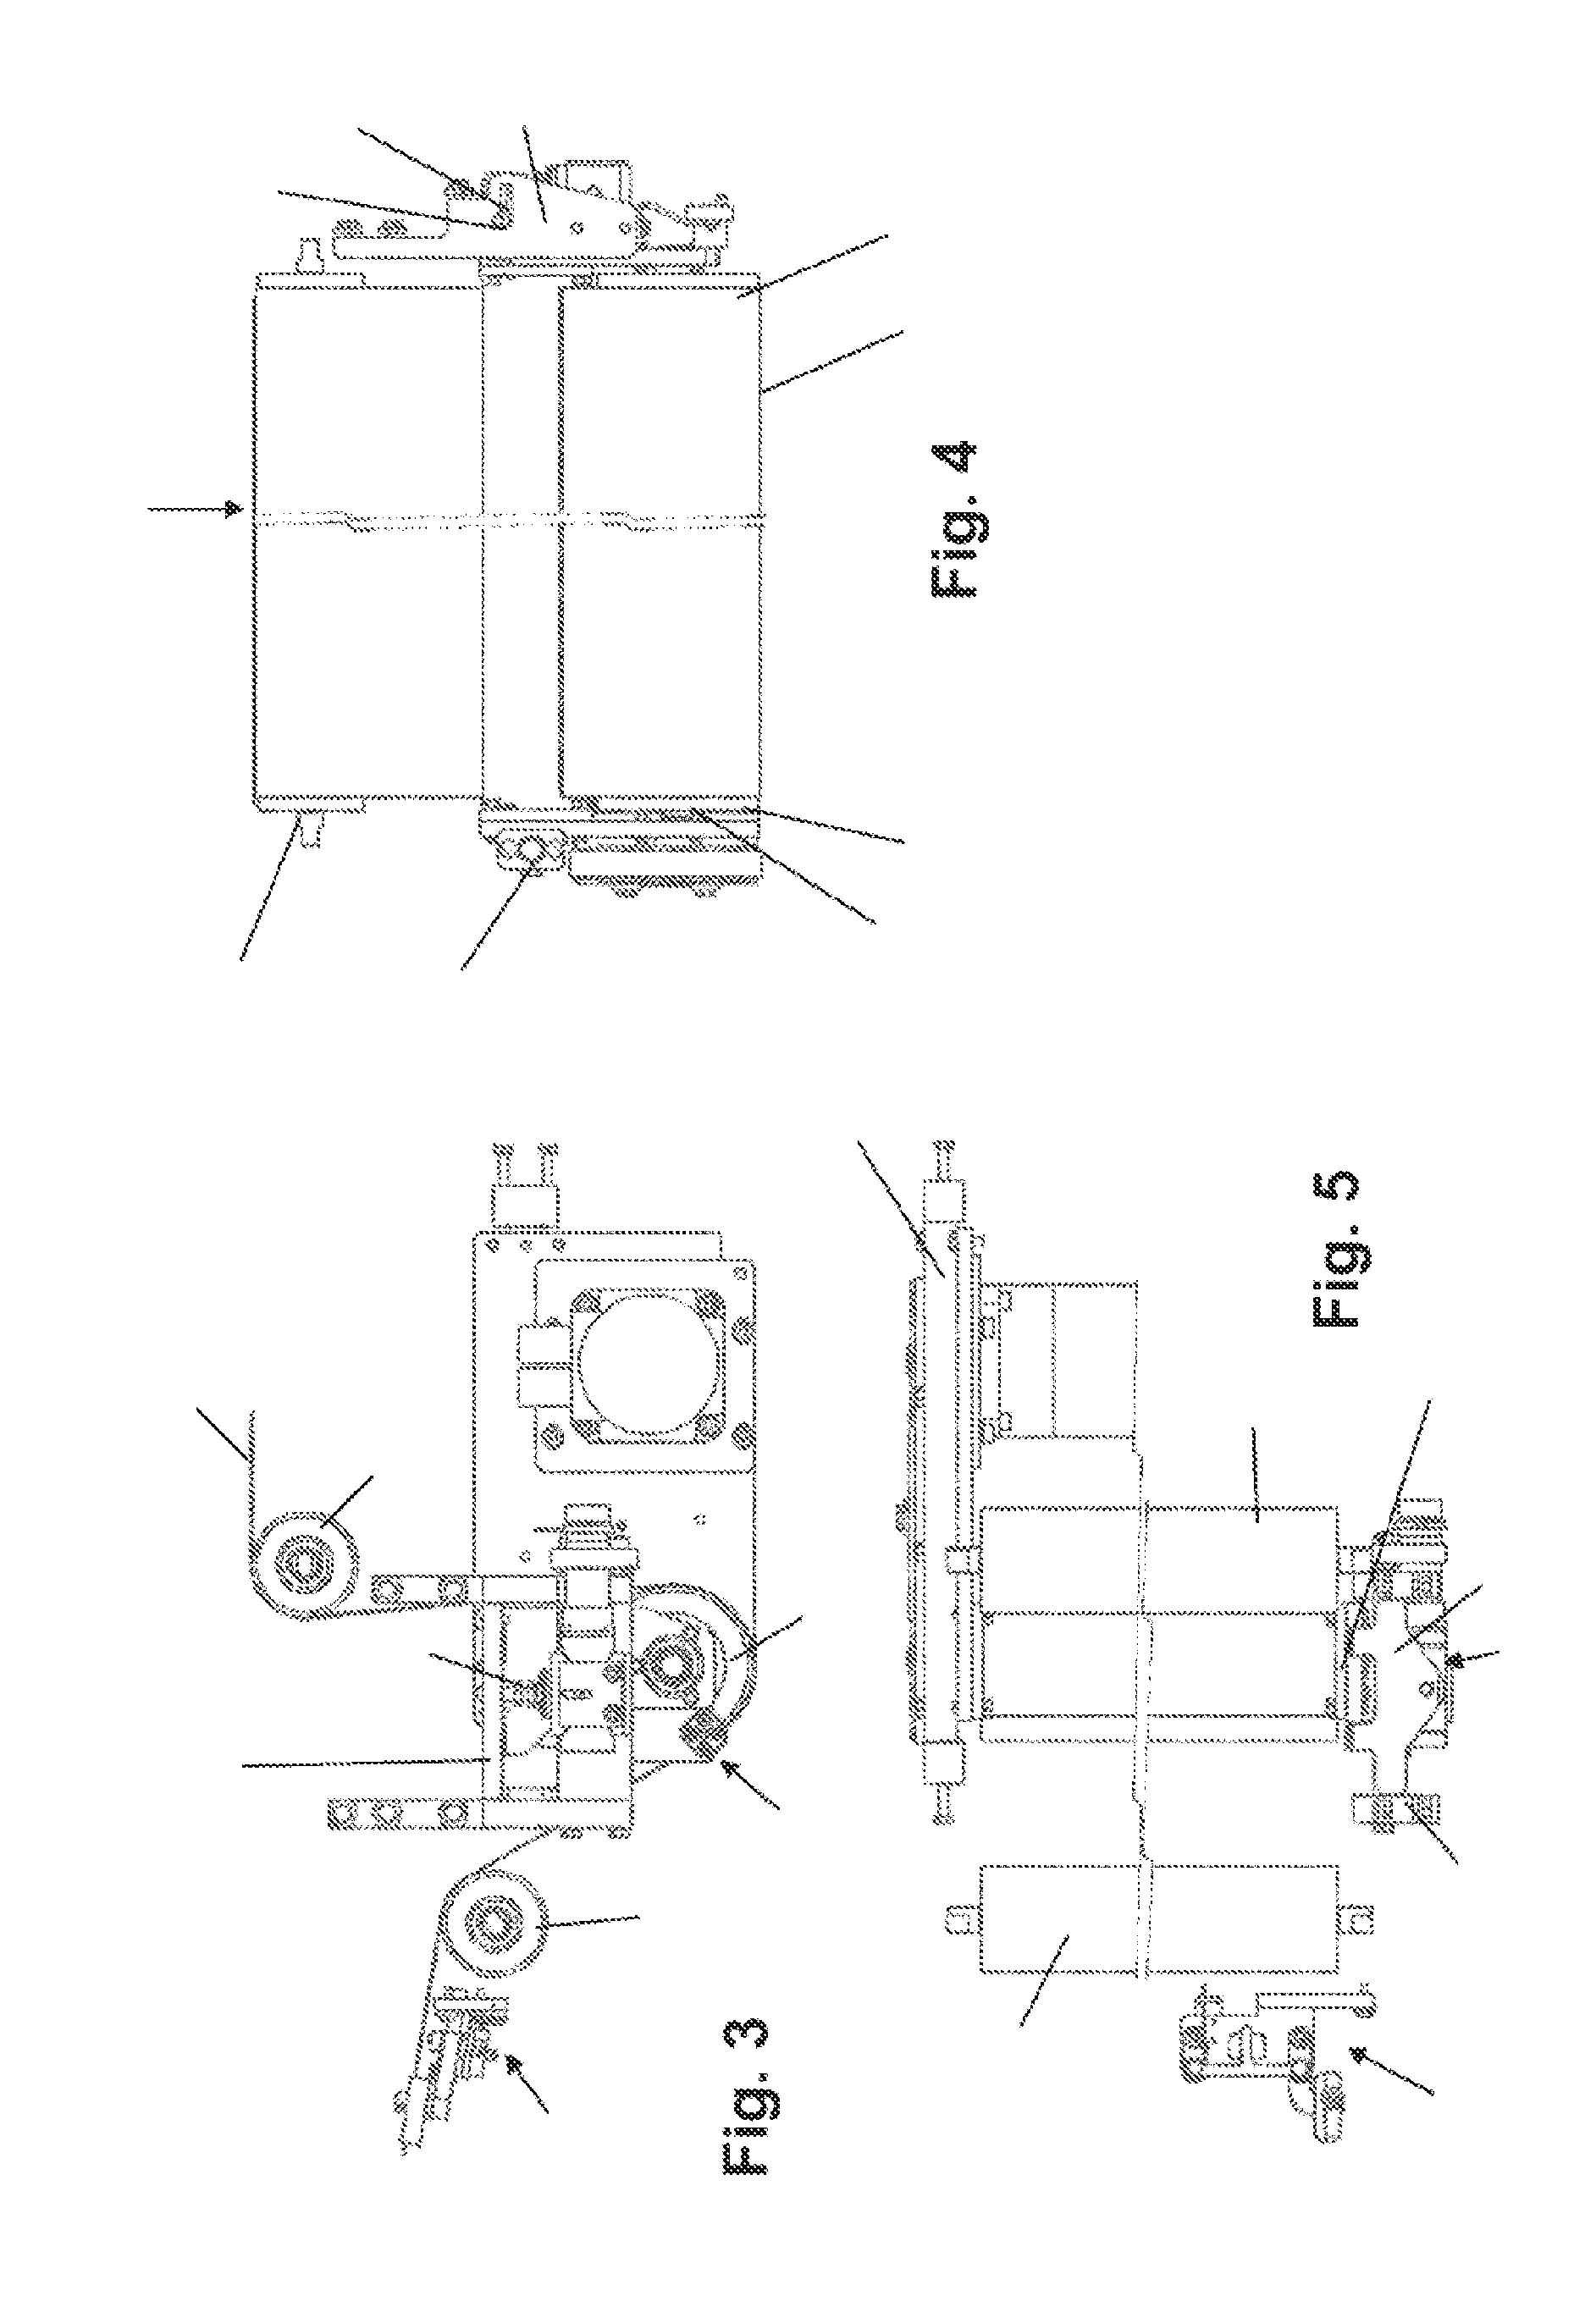 Device for regulating the linear stability of a belt